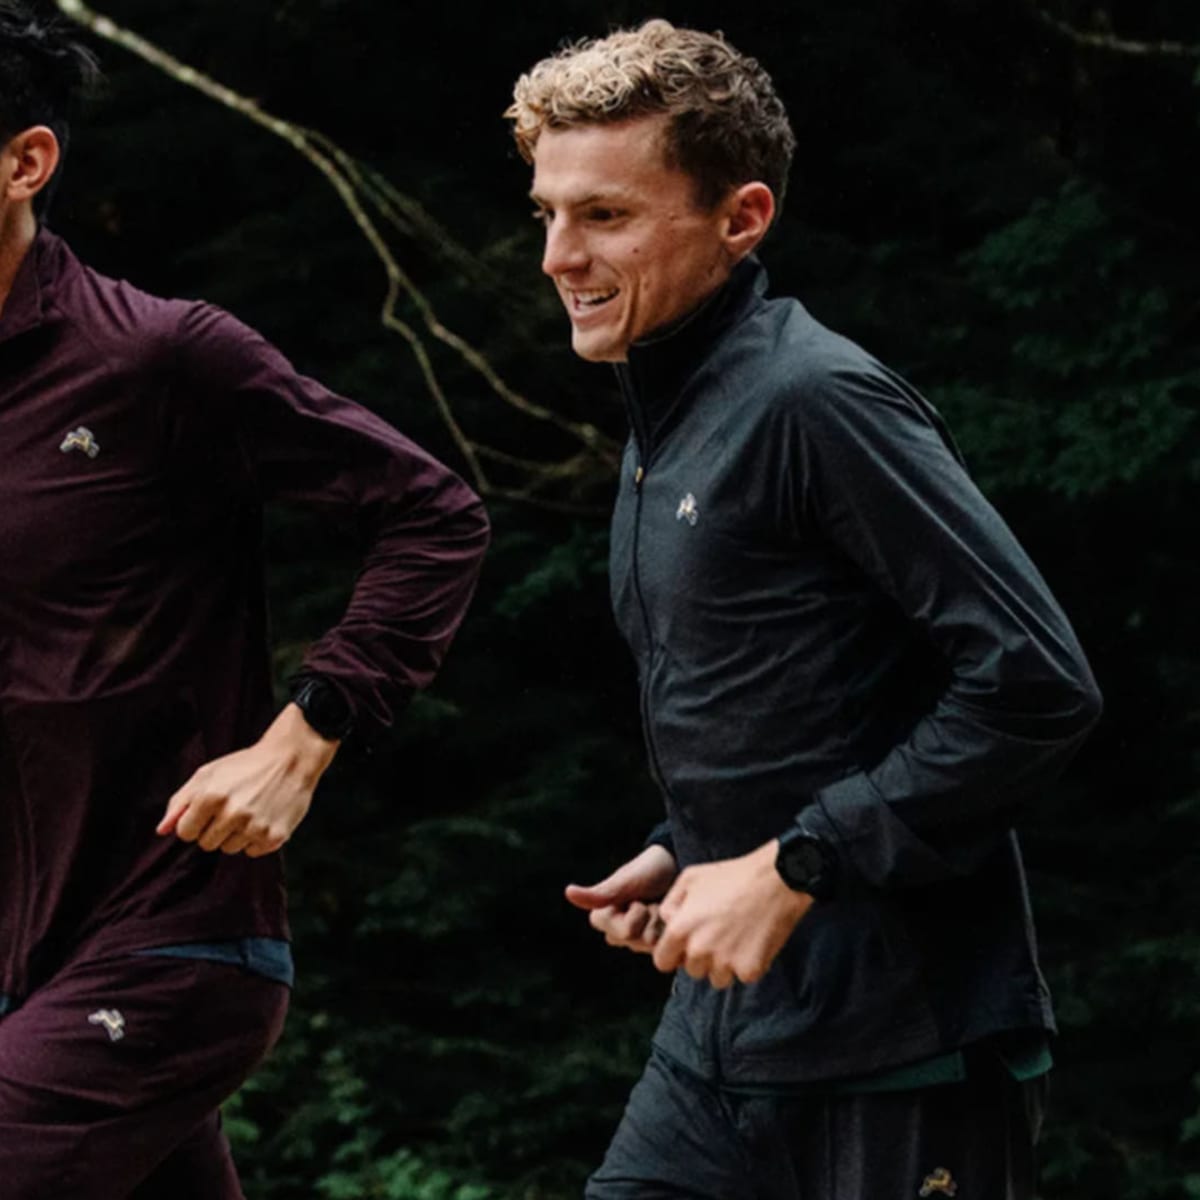 Tracksmith Cold Weather Gear Review - Believe in the Run